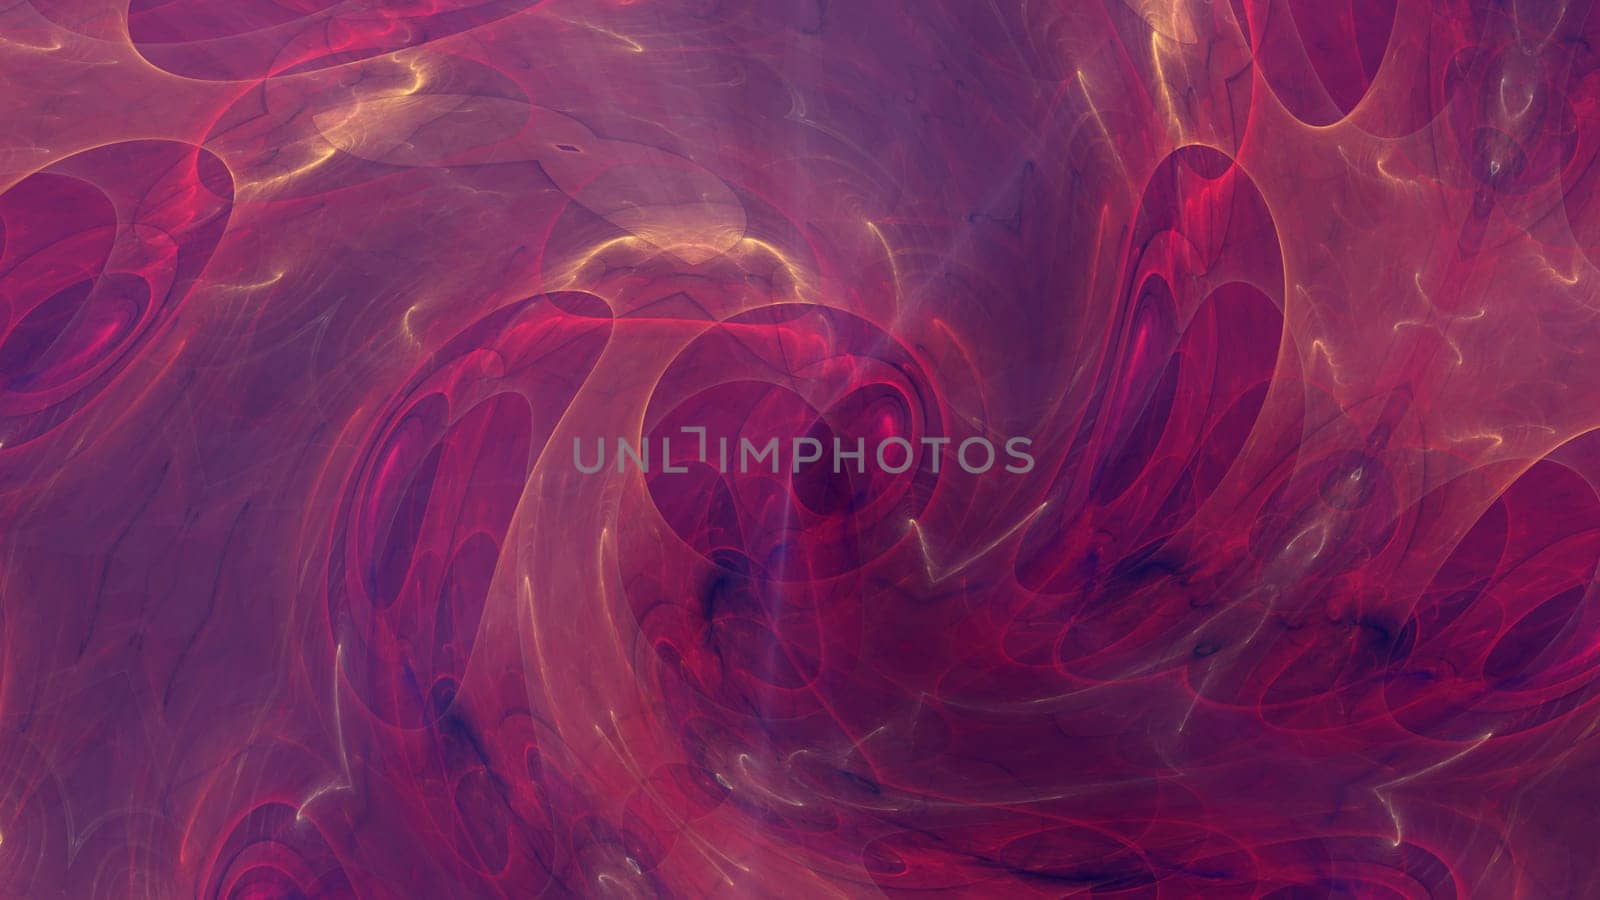 Fire Flame Ray abstract illustration by alex_nako